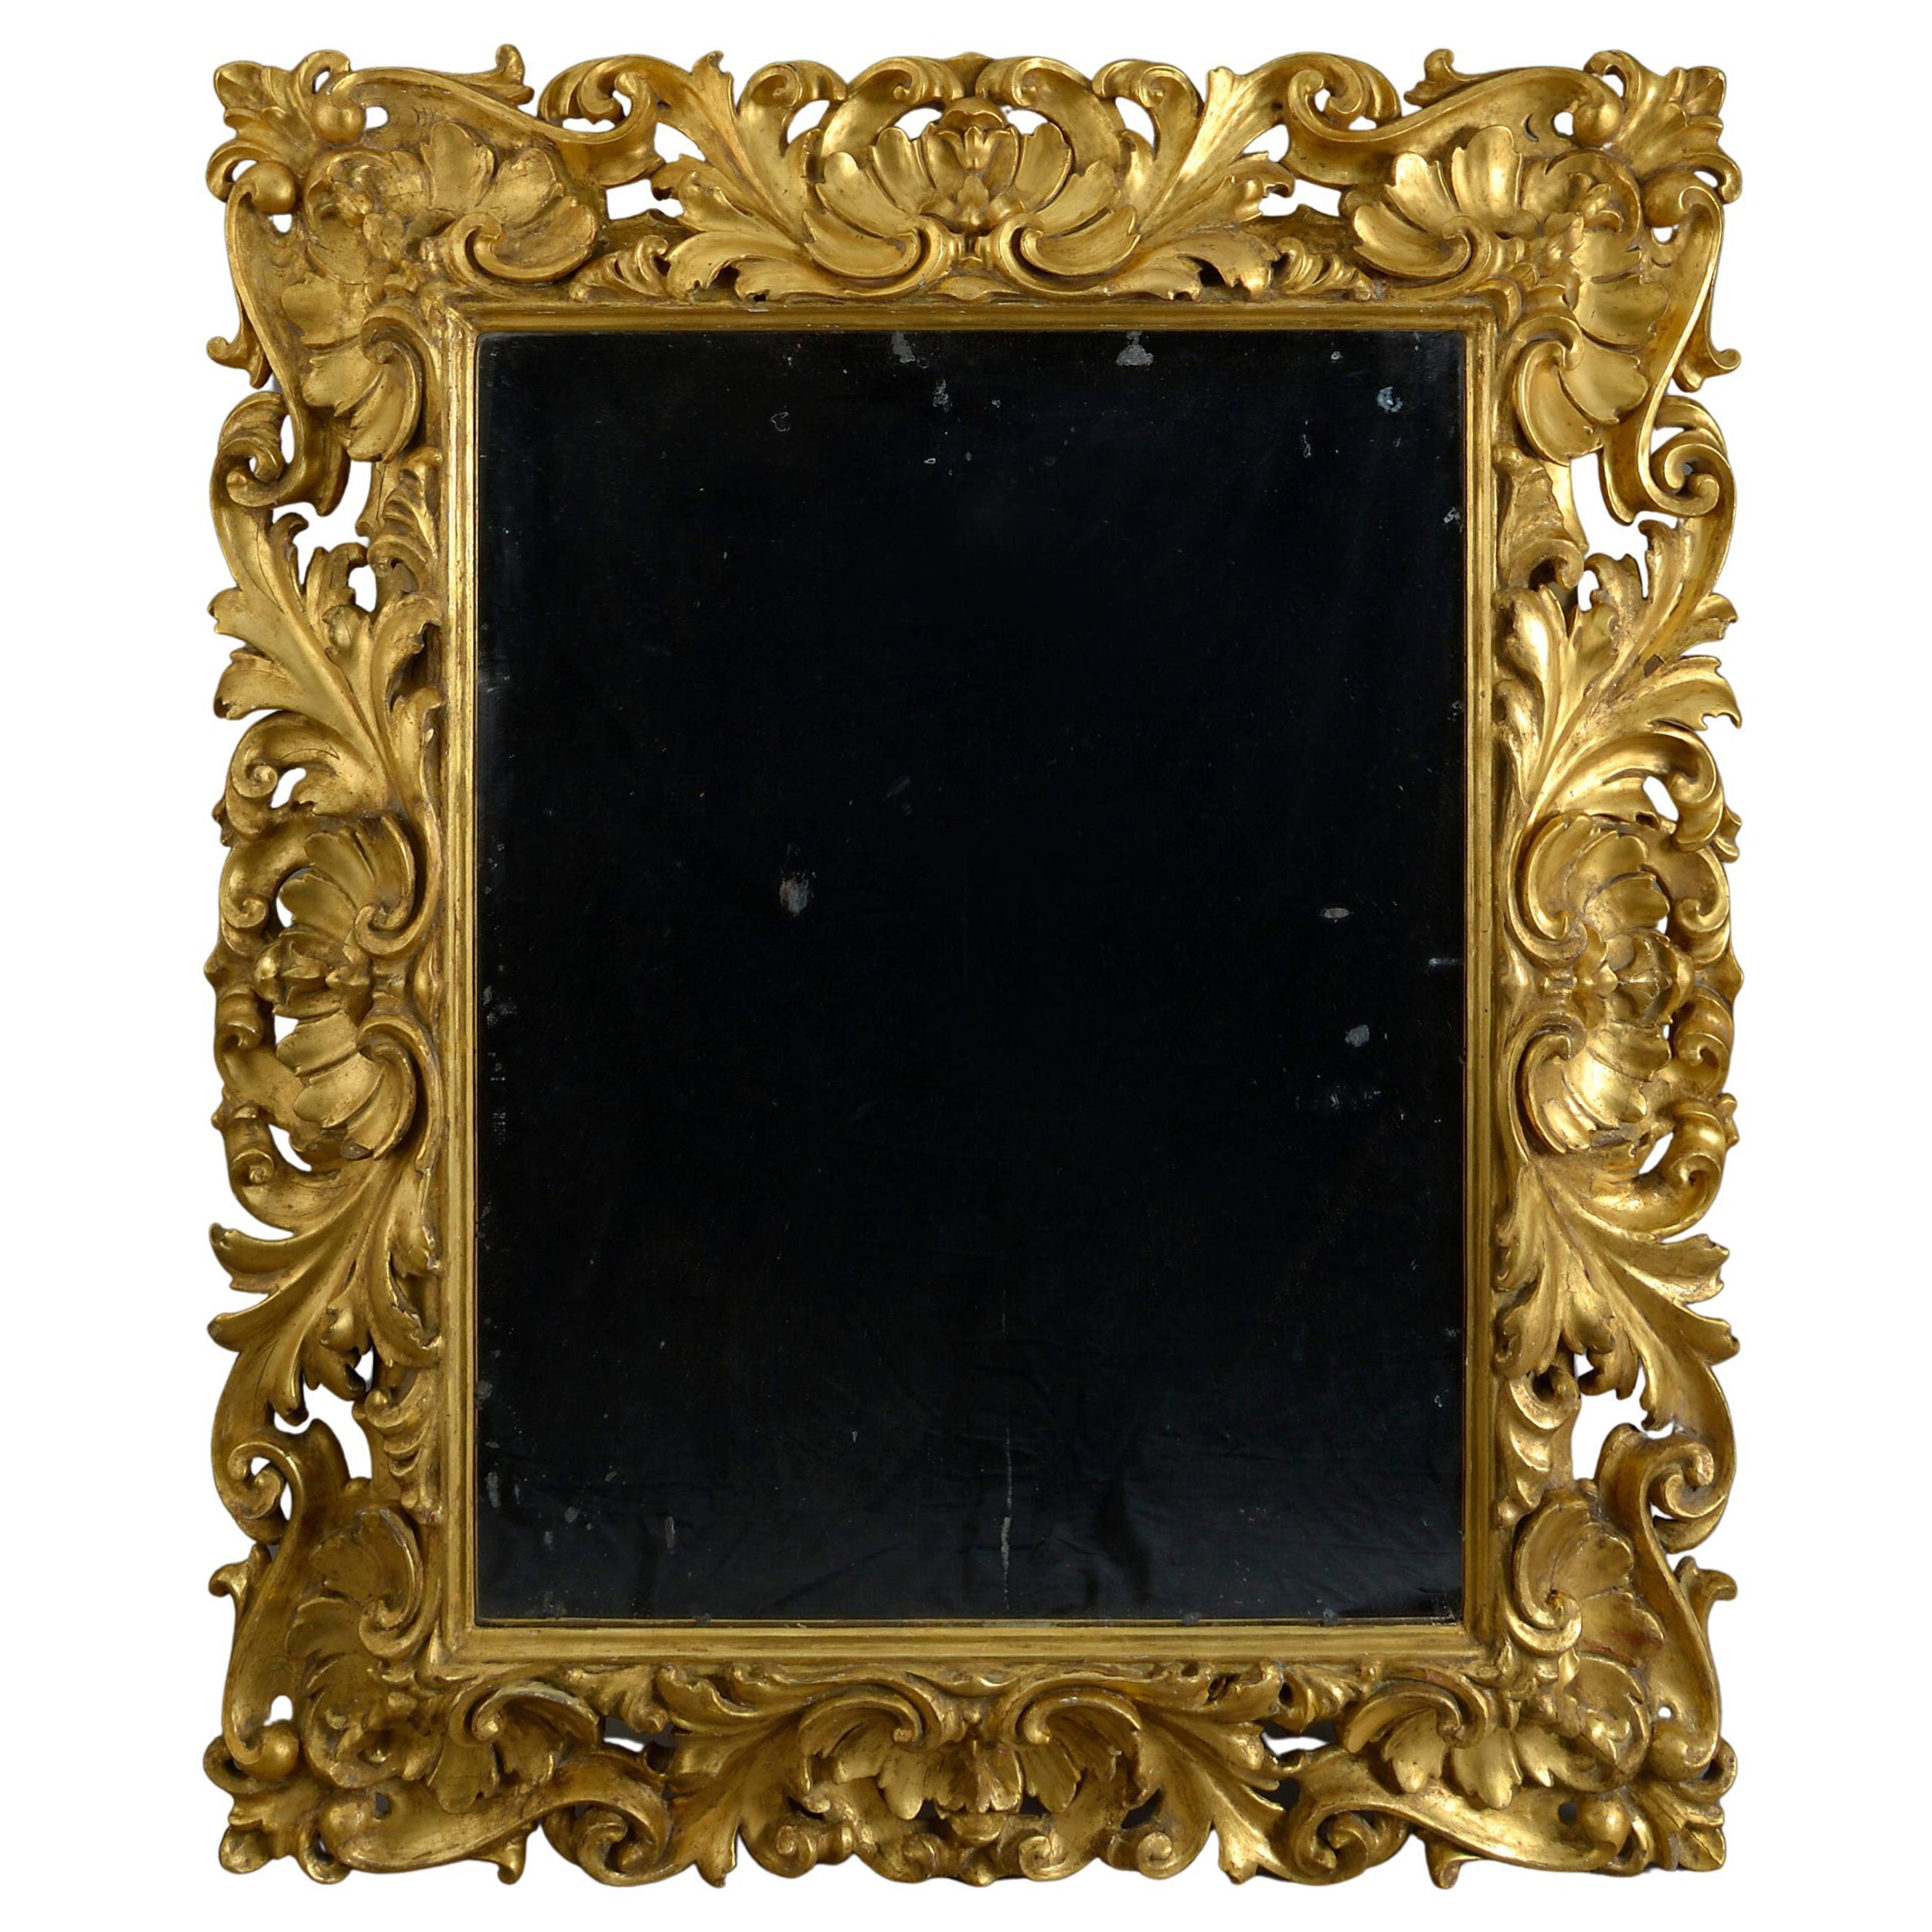 18th Century, Baroque Period Carved Giltwood Mirror